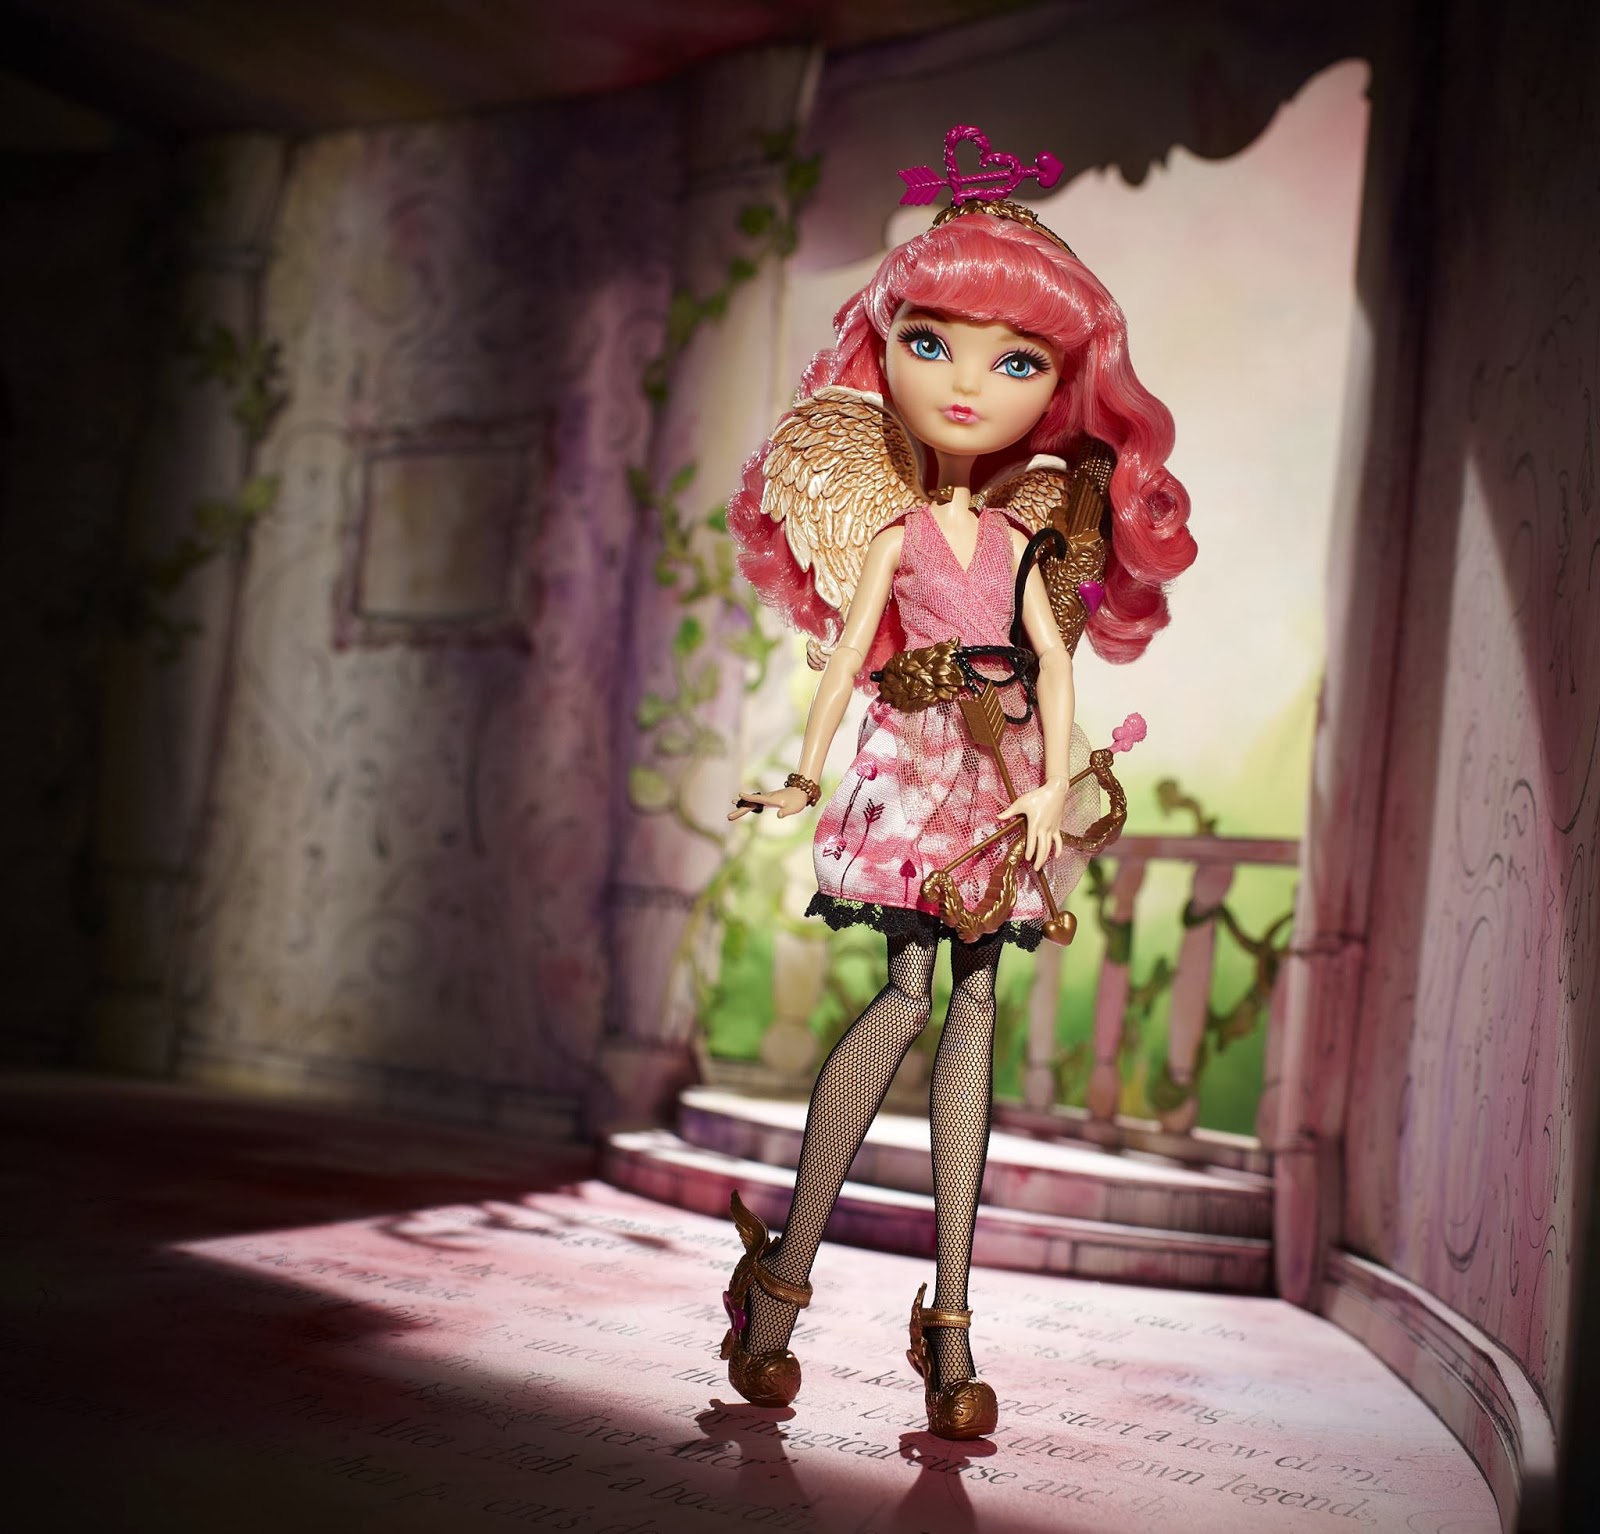 My toys,loves and fashions: Ever After High - Boneca C.A. Cupid!!!